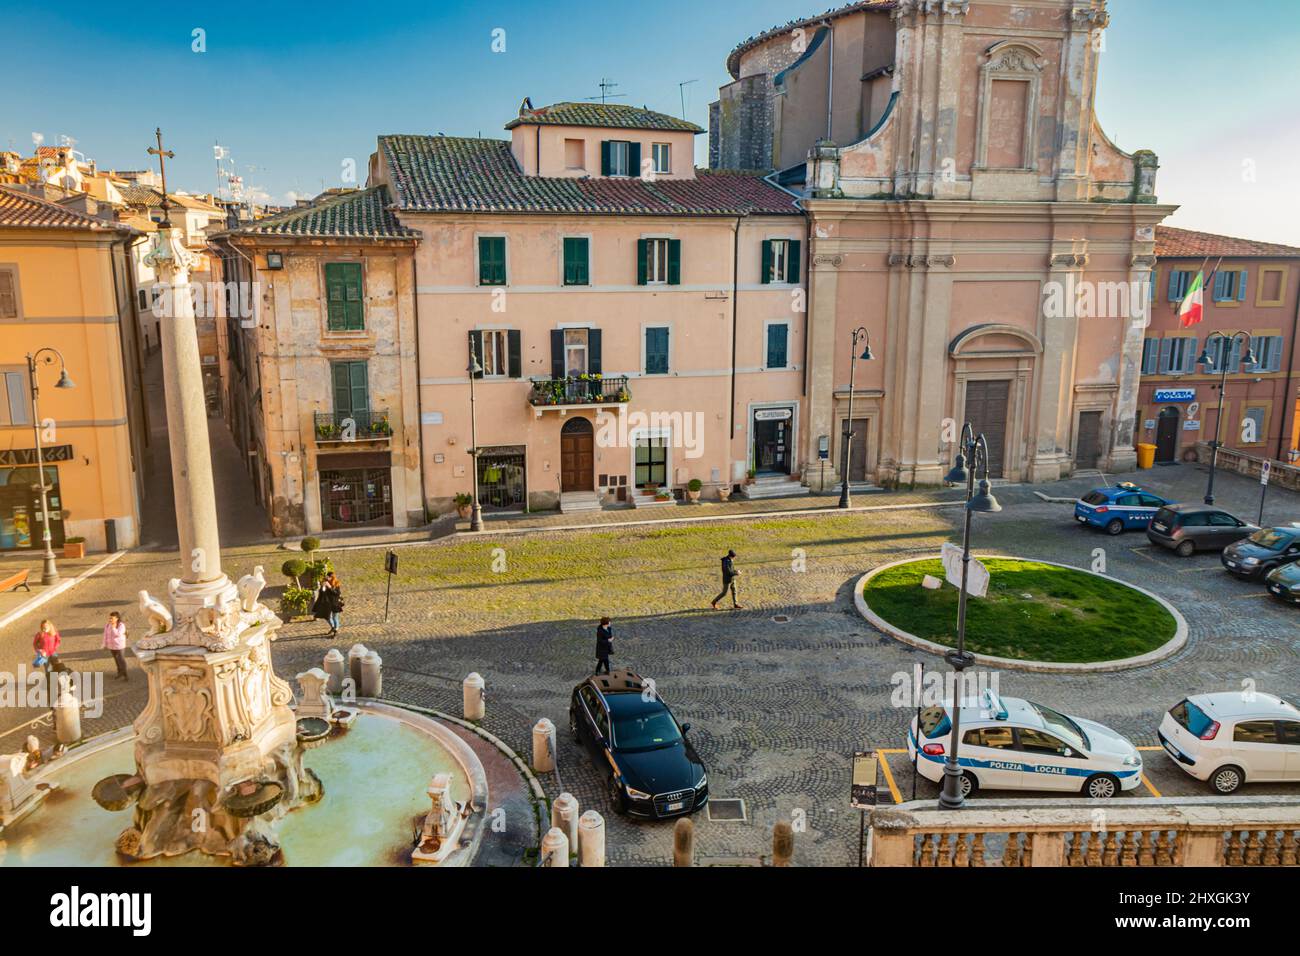 Feb. 6, 2022 - Tarquinia, Viterbo, Lazio, Italy - The main square of the village photographed from above, in the evening. Circular fountain with the o Stock Photo